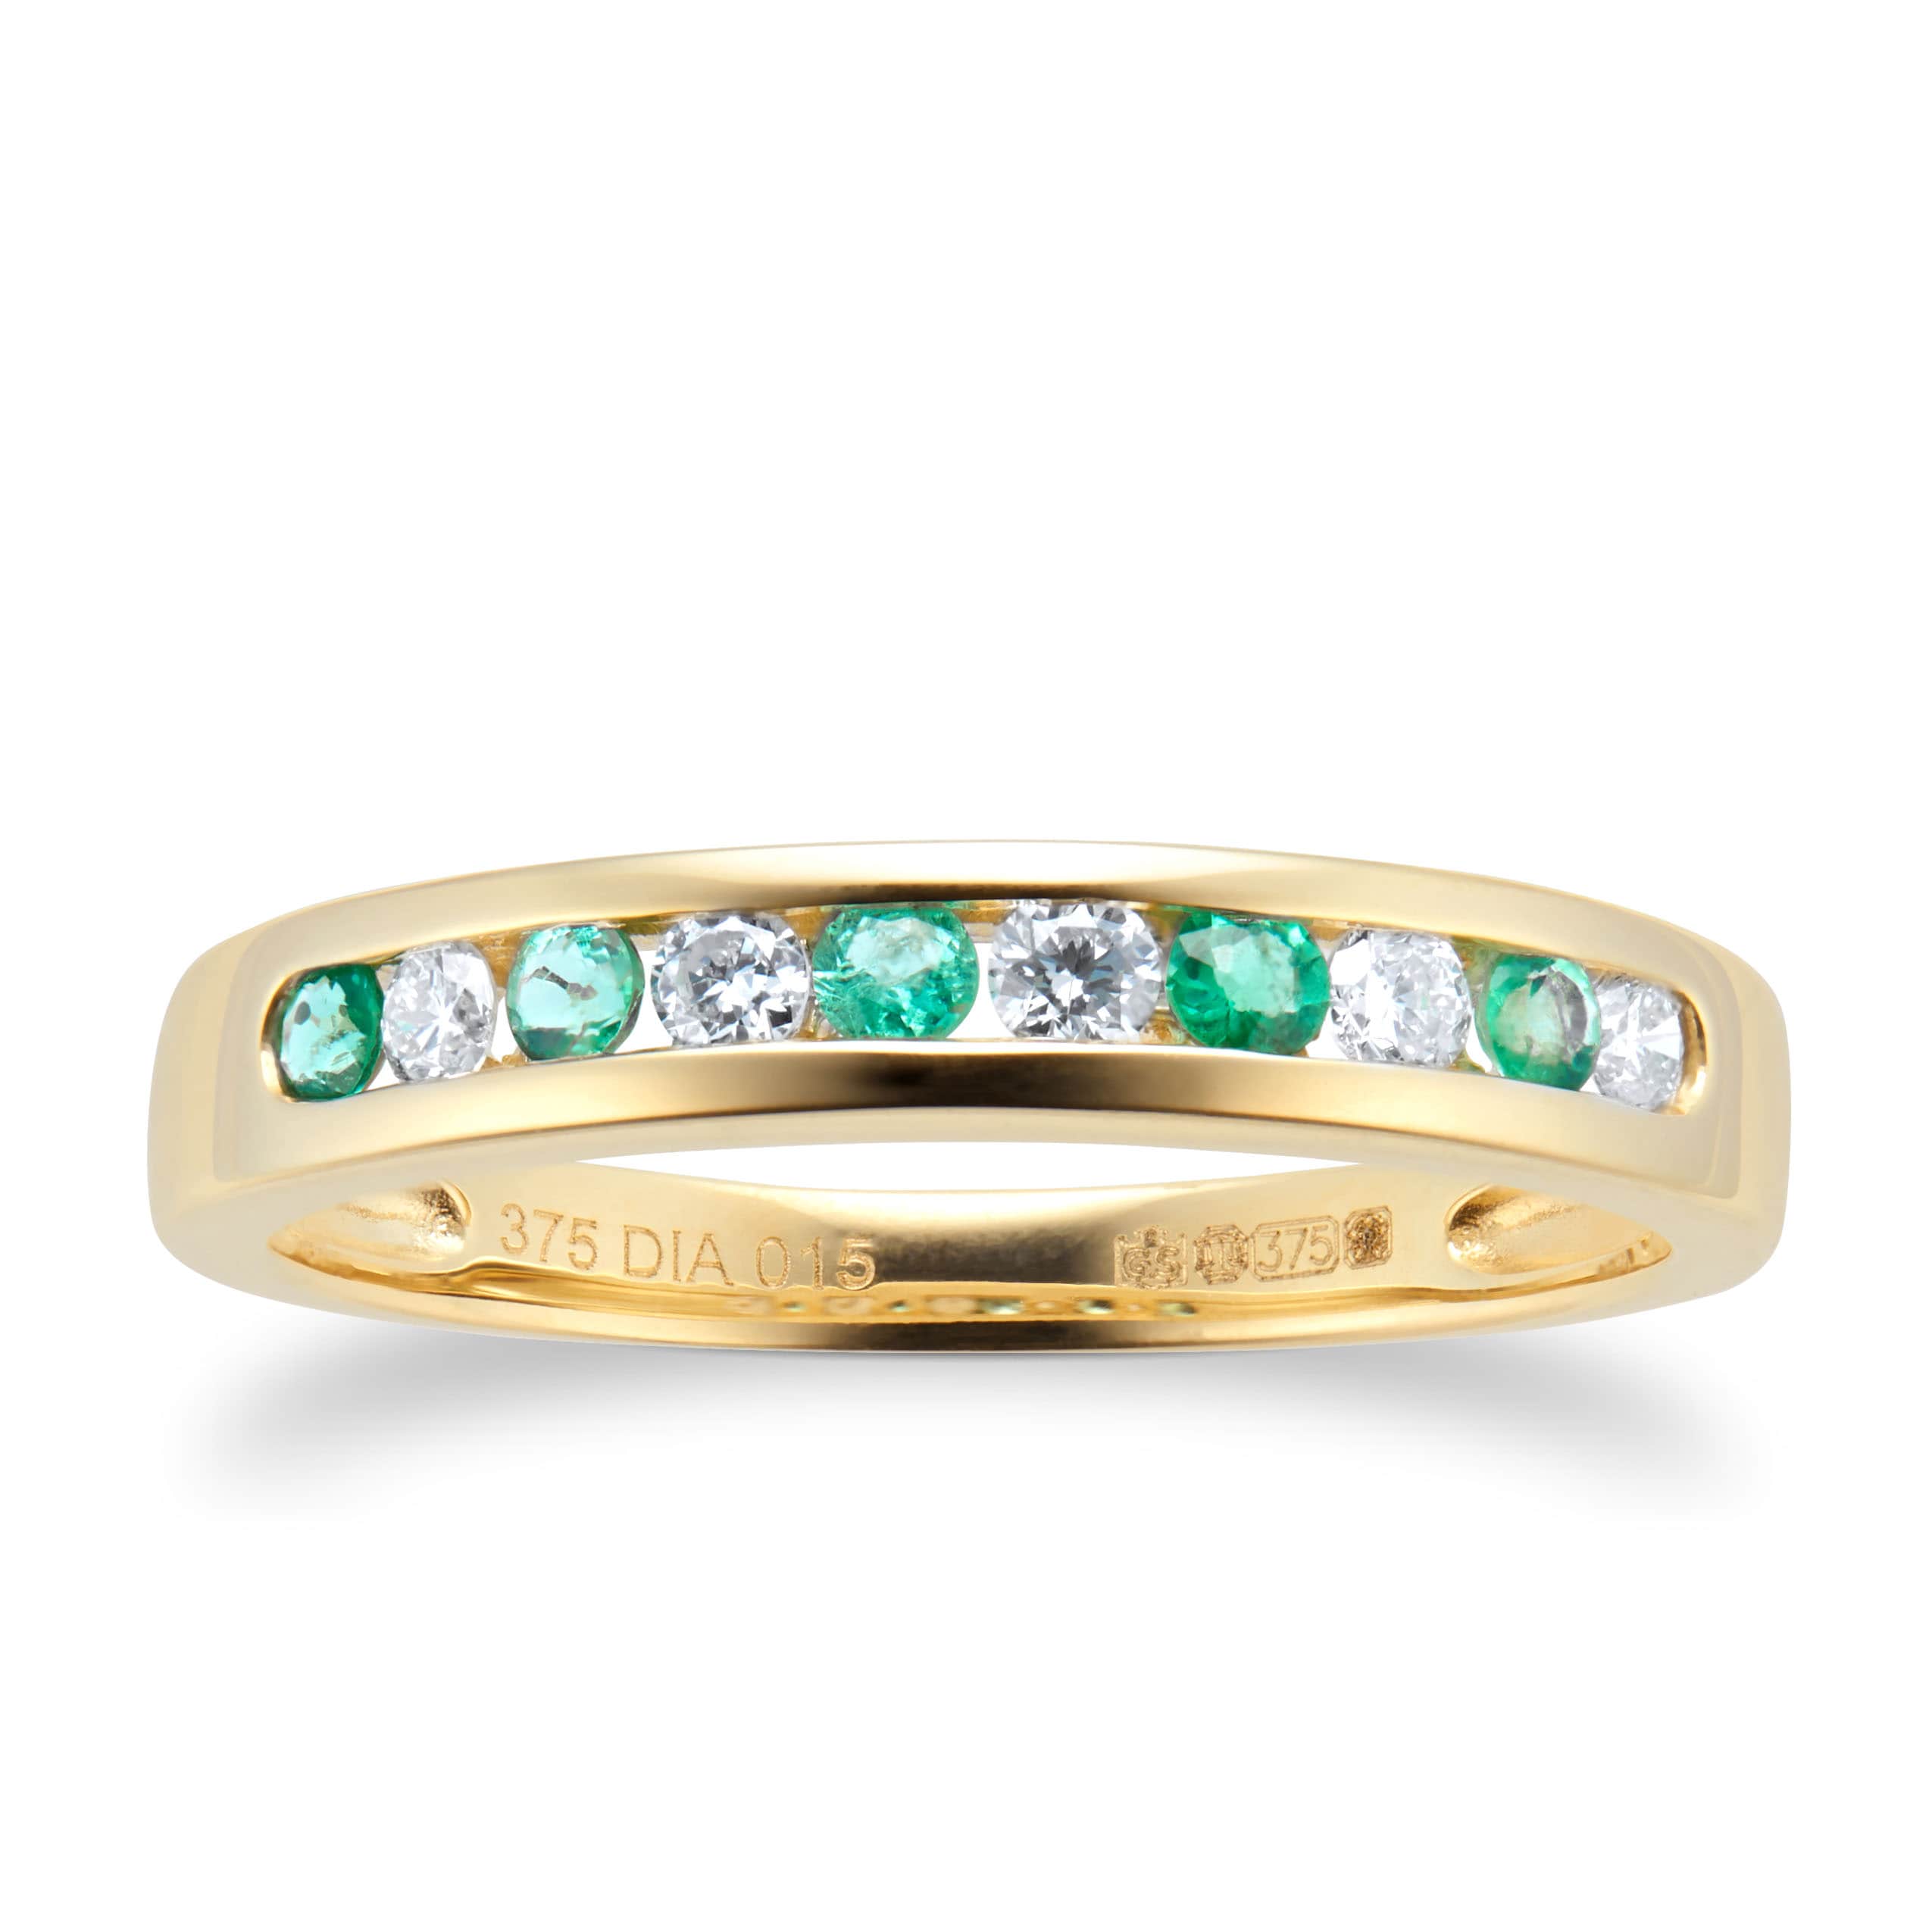 Brilliant Cut Emerald And Diamond Eternity Ring In 9 Carat Yellow Gold - Ring Size M